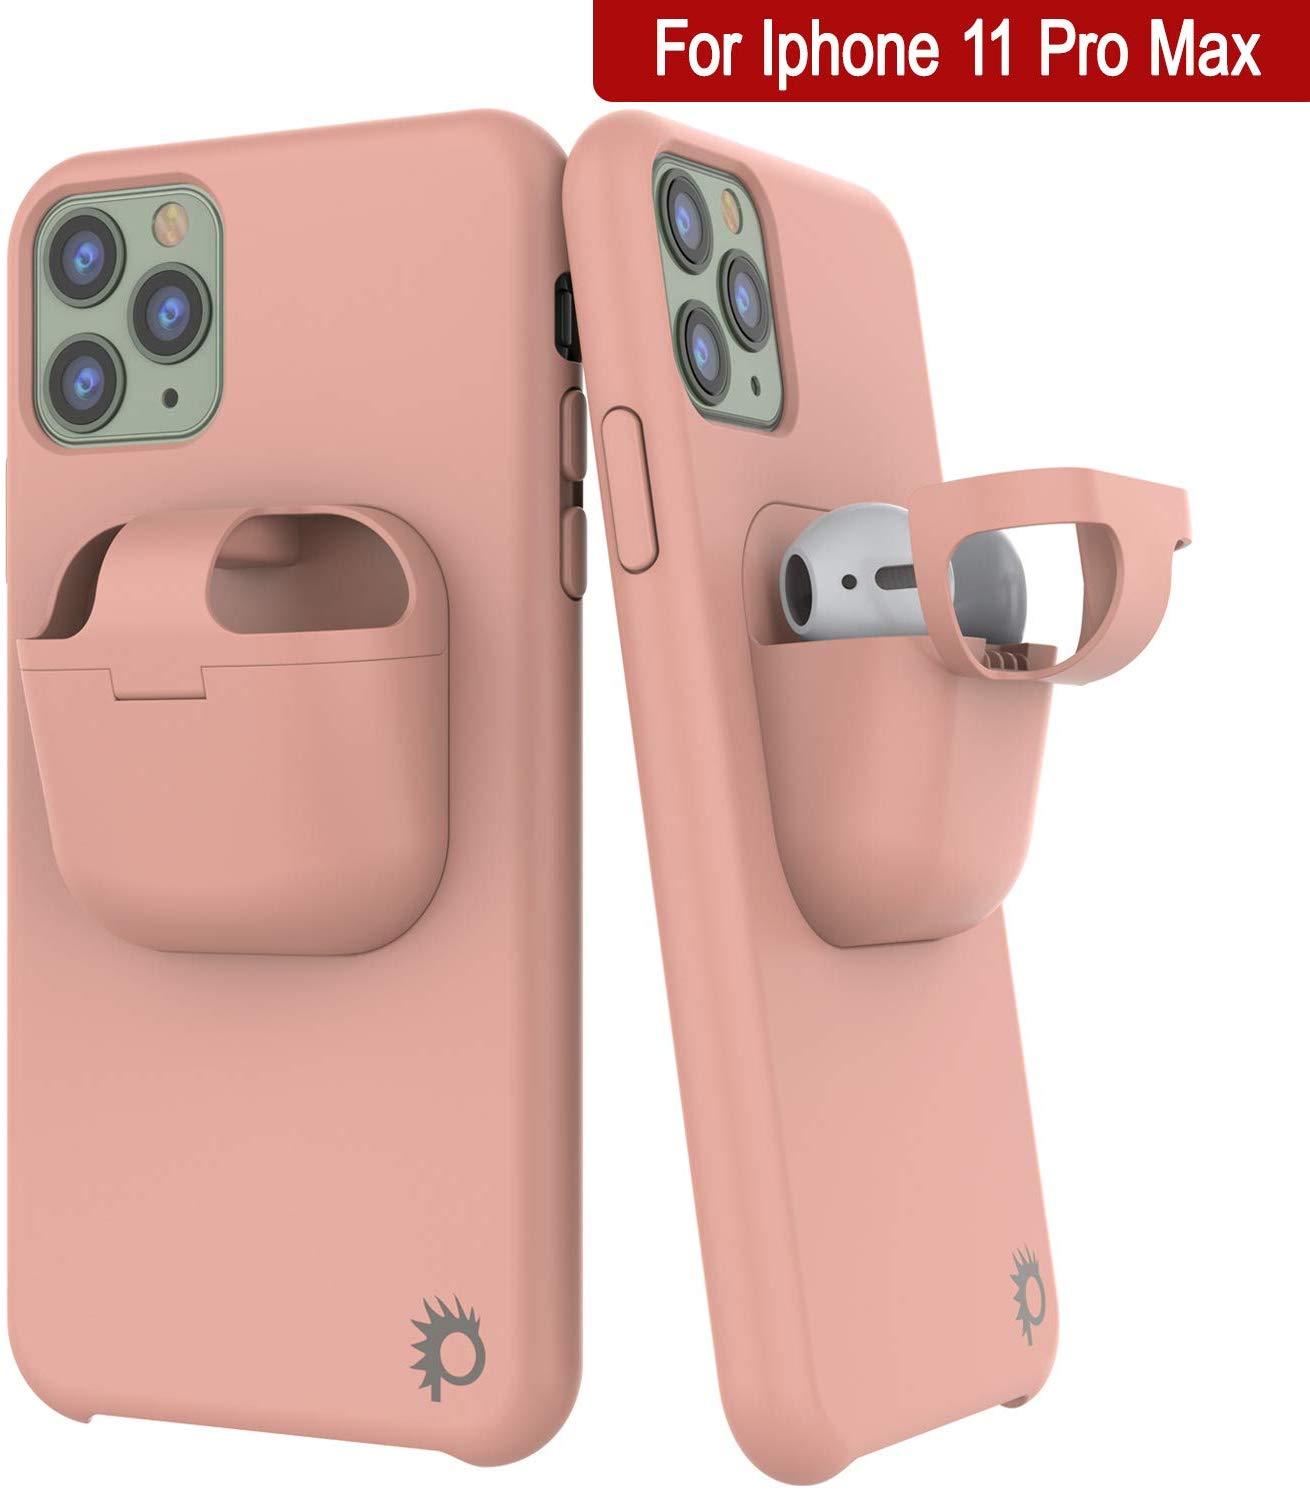 Fashion for Apple Airpods 2 Case Cover Airpods PRO Case iPhone Earphone  Accessories Air Pod Casef - China Phone Case and Silicone Liquid Phone Case  for iPhone 11 PRO Max price